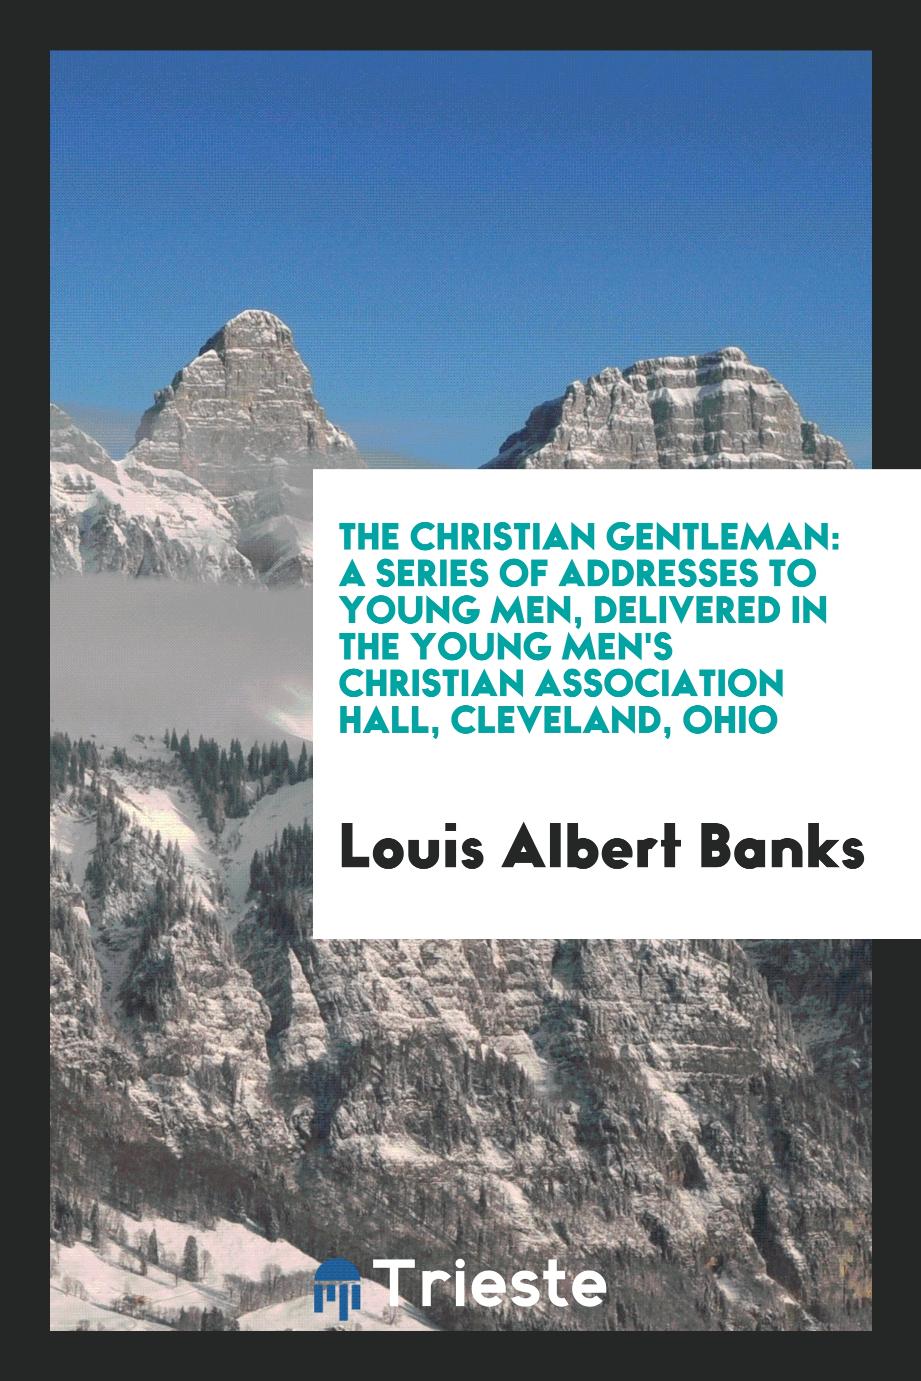 The Christian Gentleman: A Series of Addresses to Young Men, Delivered in the Young Men's Christian Association Hall, Cleveland, Ohio